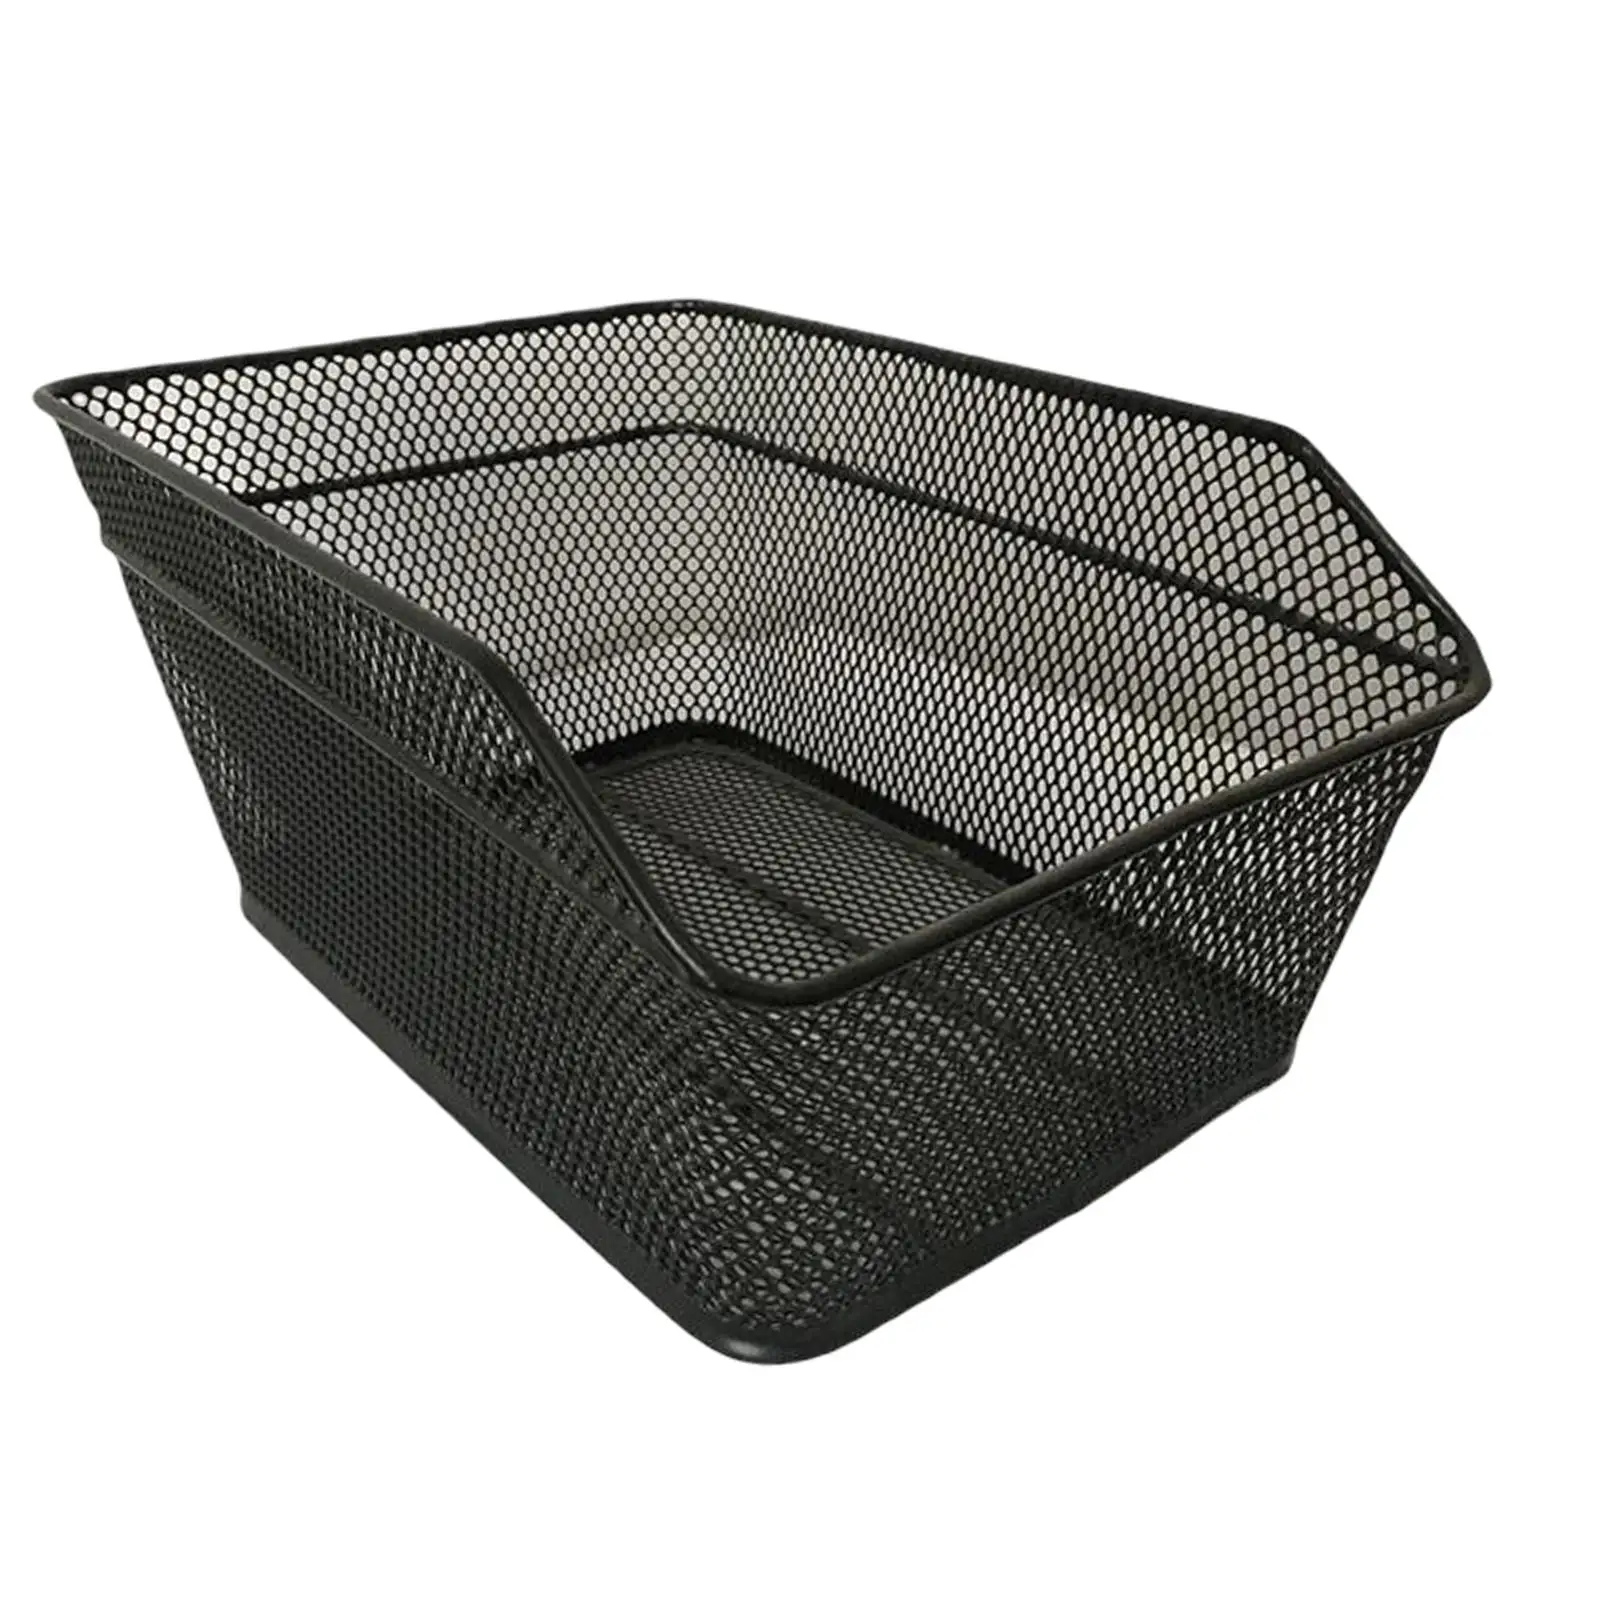 Durable Rear Bike Basket Detchable Accessories Wear Resistant Sundries Container High Capacity Black Luggage Rack for Bike Sport